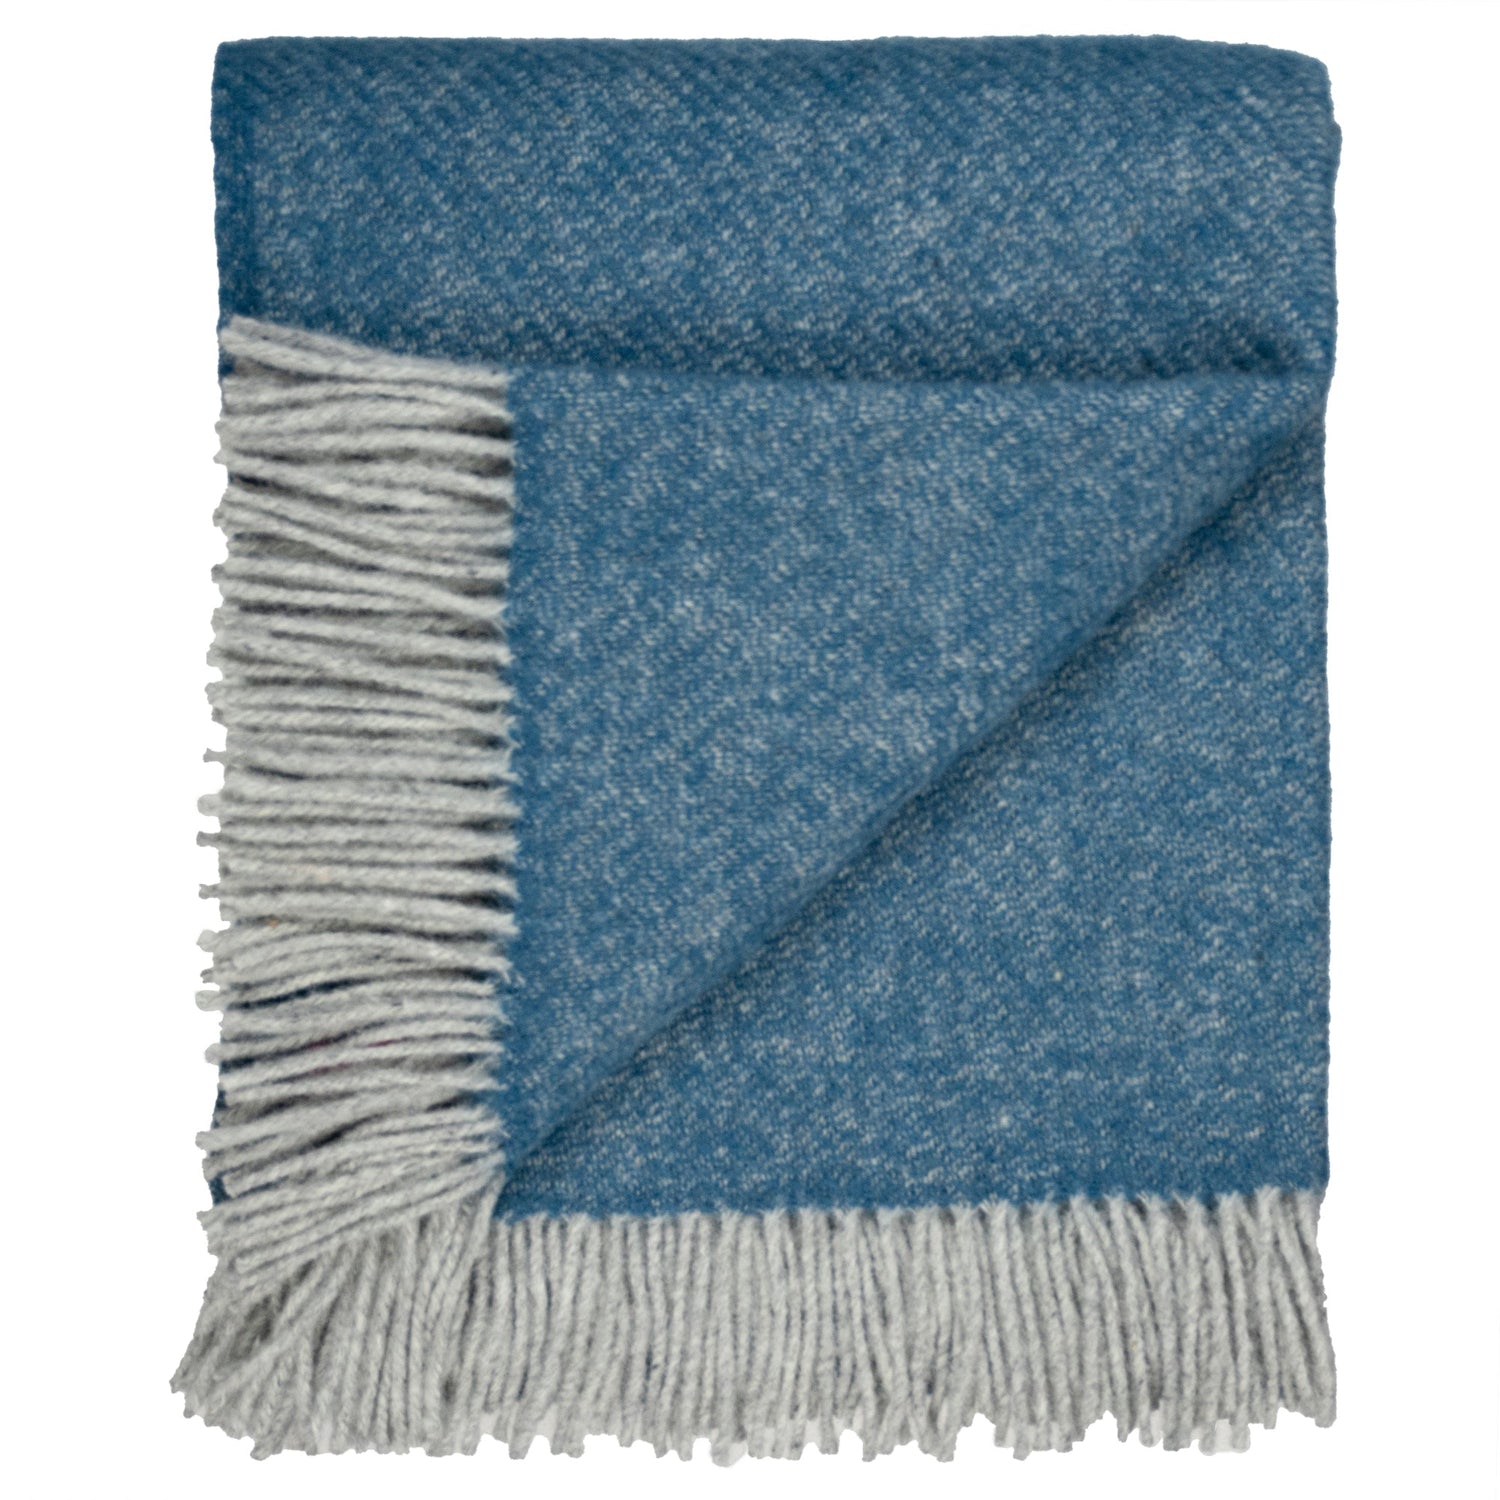 Southampton Home Wool Twill Throw Blanket (Classic Blue Hydrangea)-Throws and Blankets-810032752477-SHWoolTwillBlue-Prince of Scots